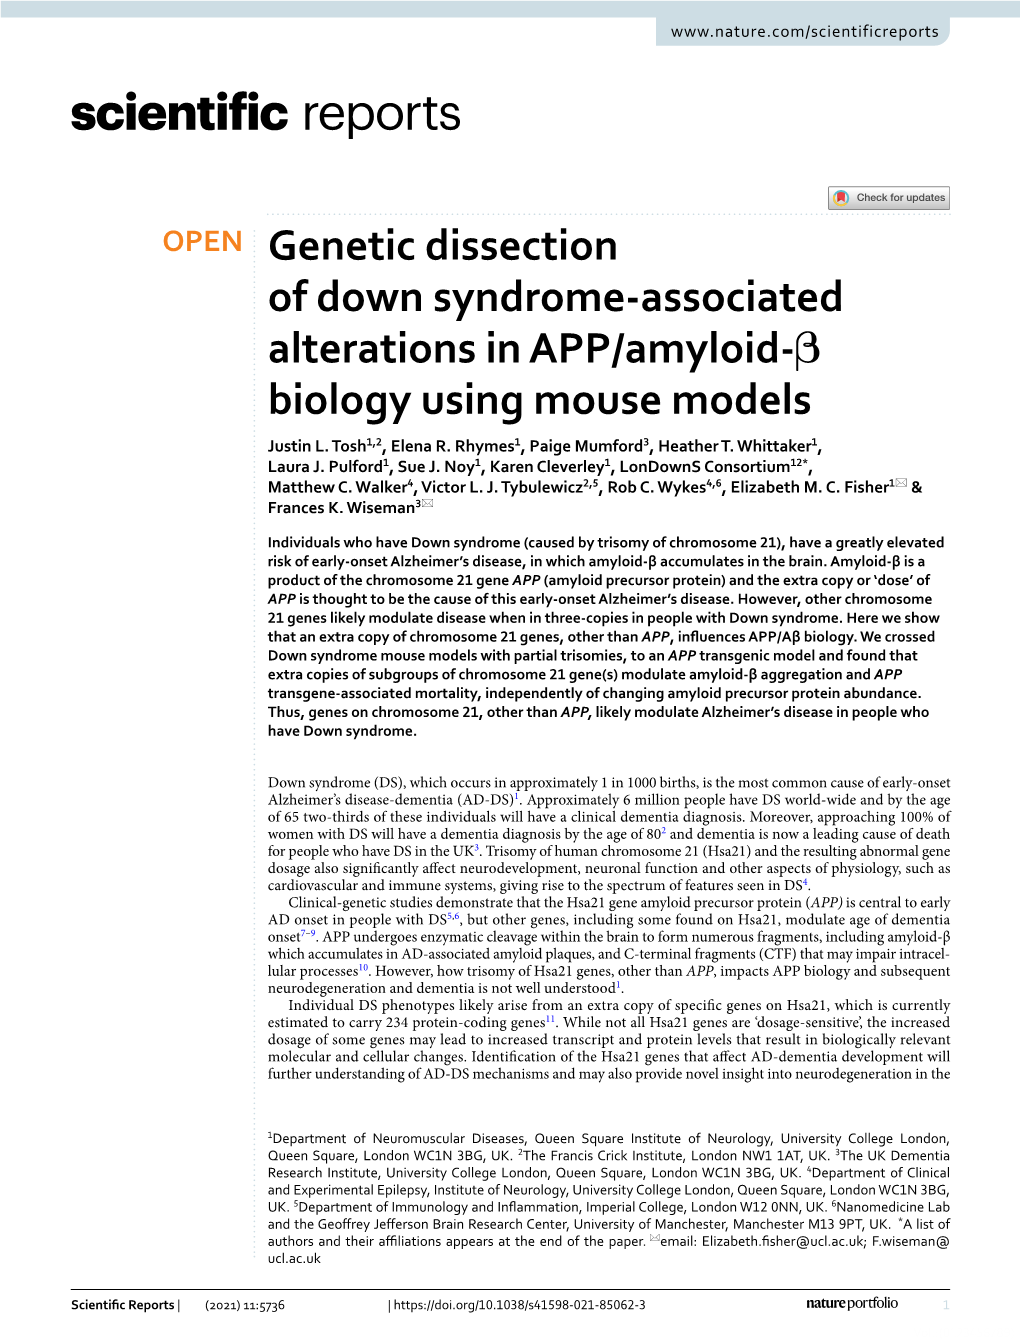 Genetic Dissection of Down Syndrome-Associated Alterations In